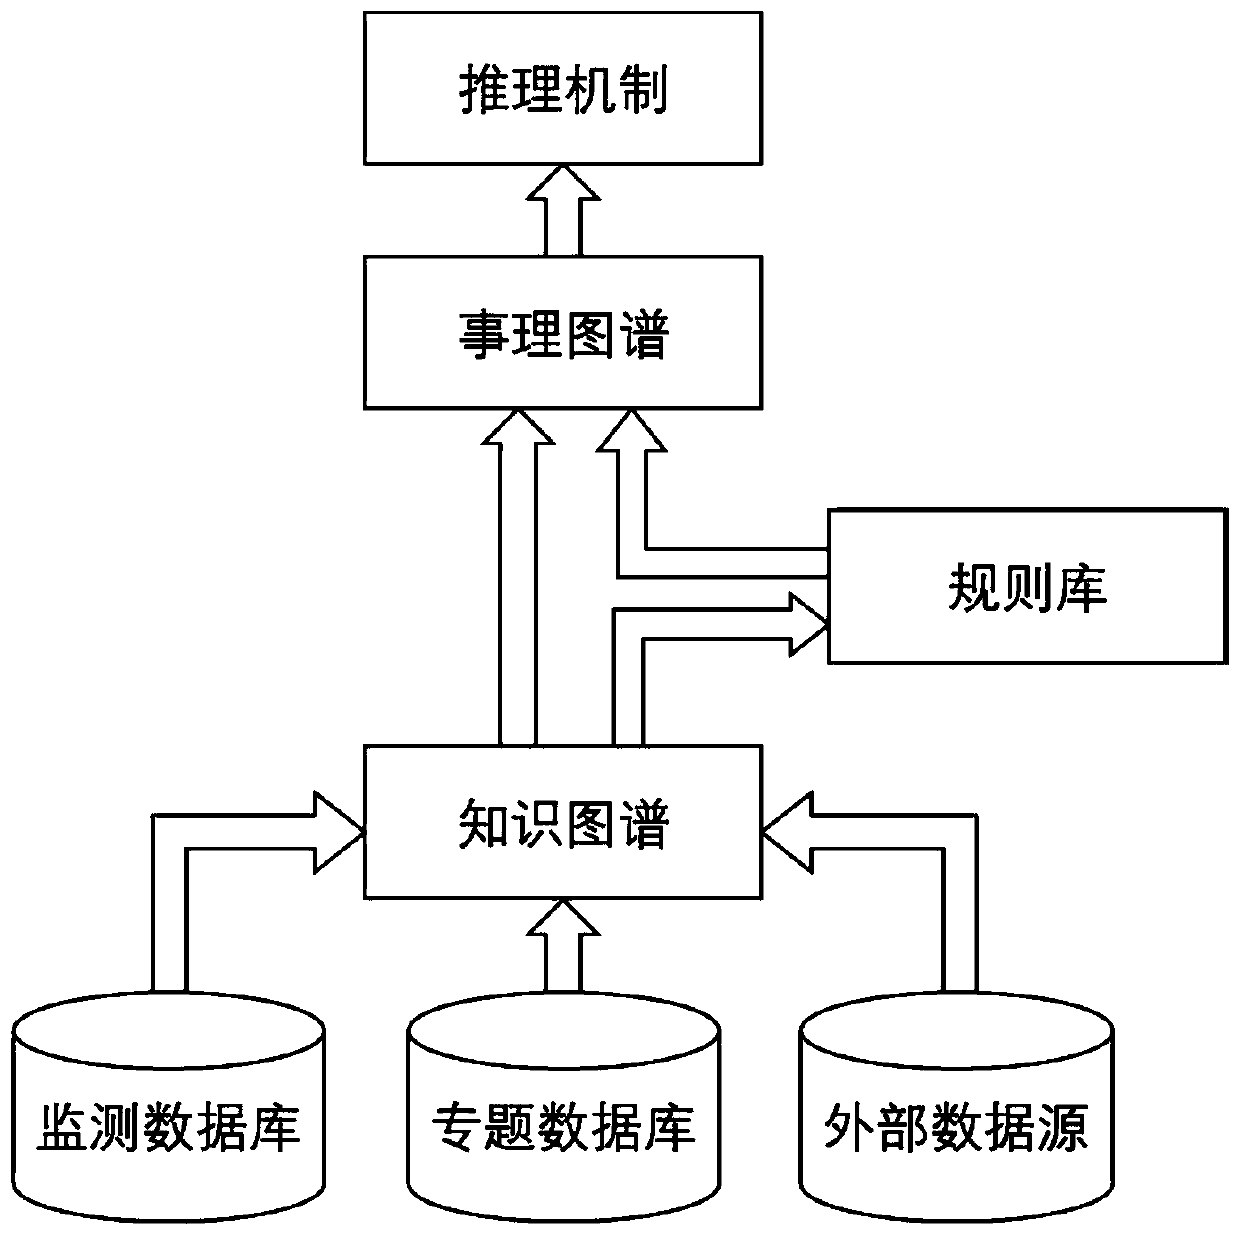 Decision support system architecture and method based on water conservancy knowledge-fact coupling network